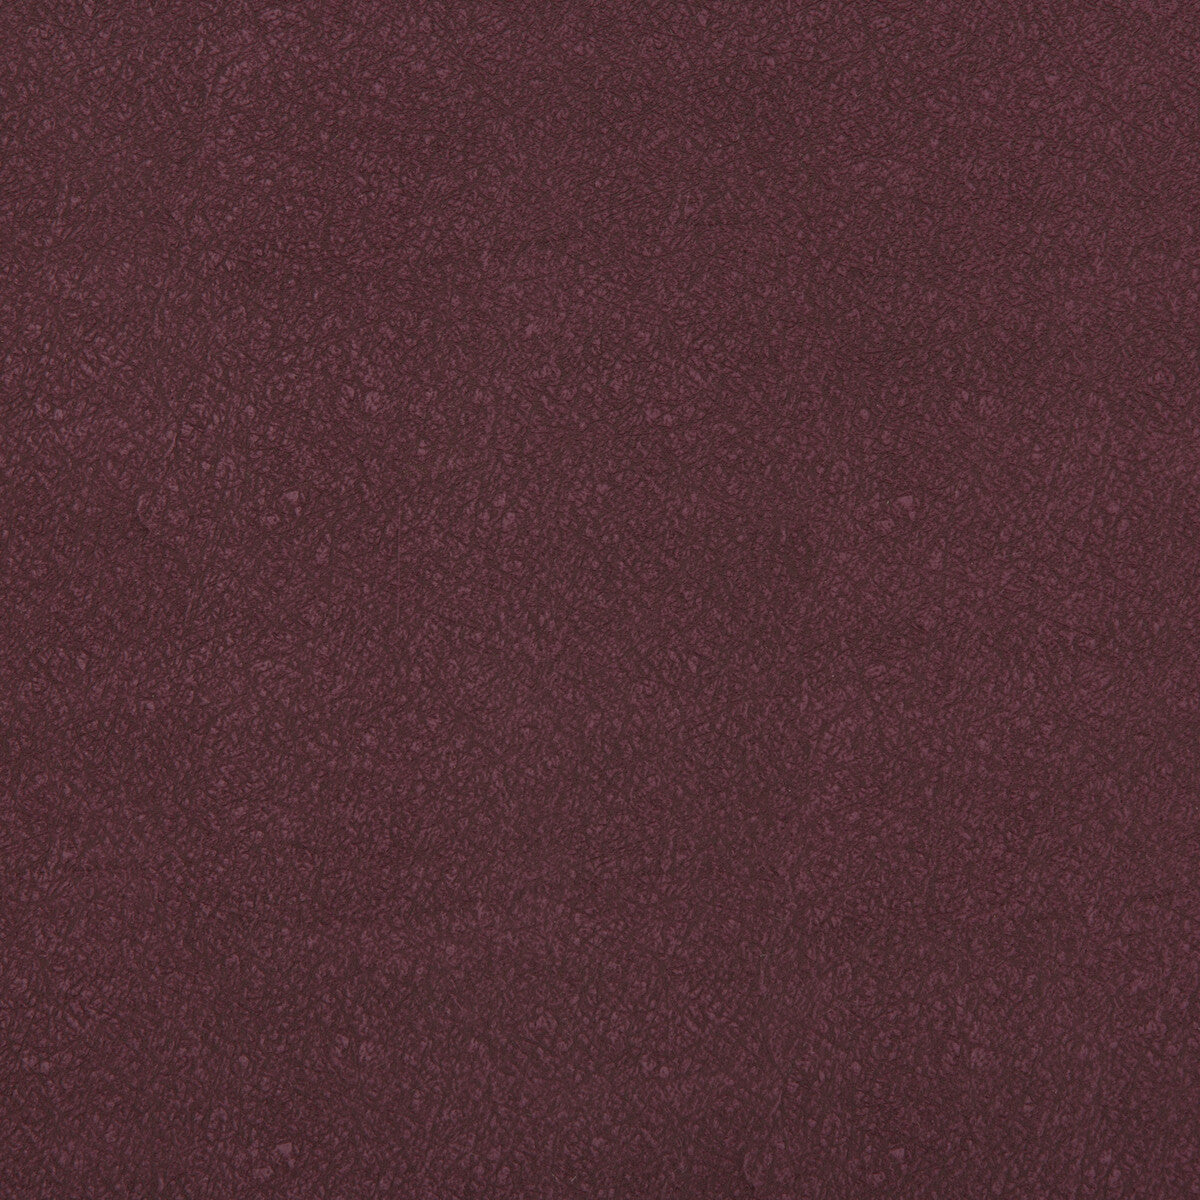 Ames fabric in vino color - pattern AMES.1010.0 - by Kravet Contract